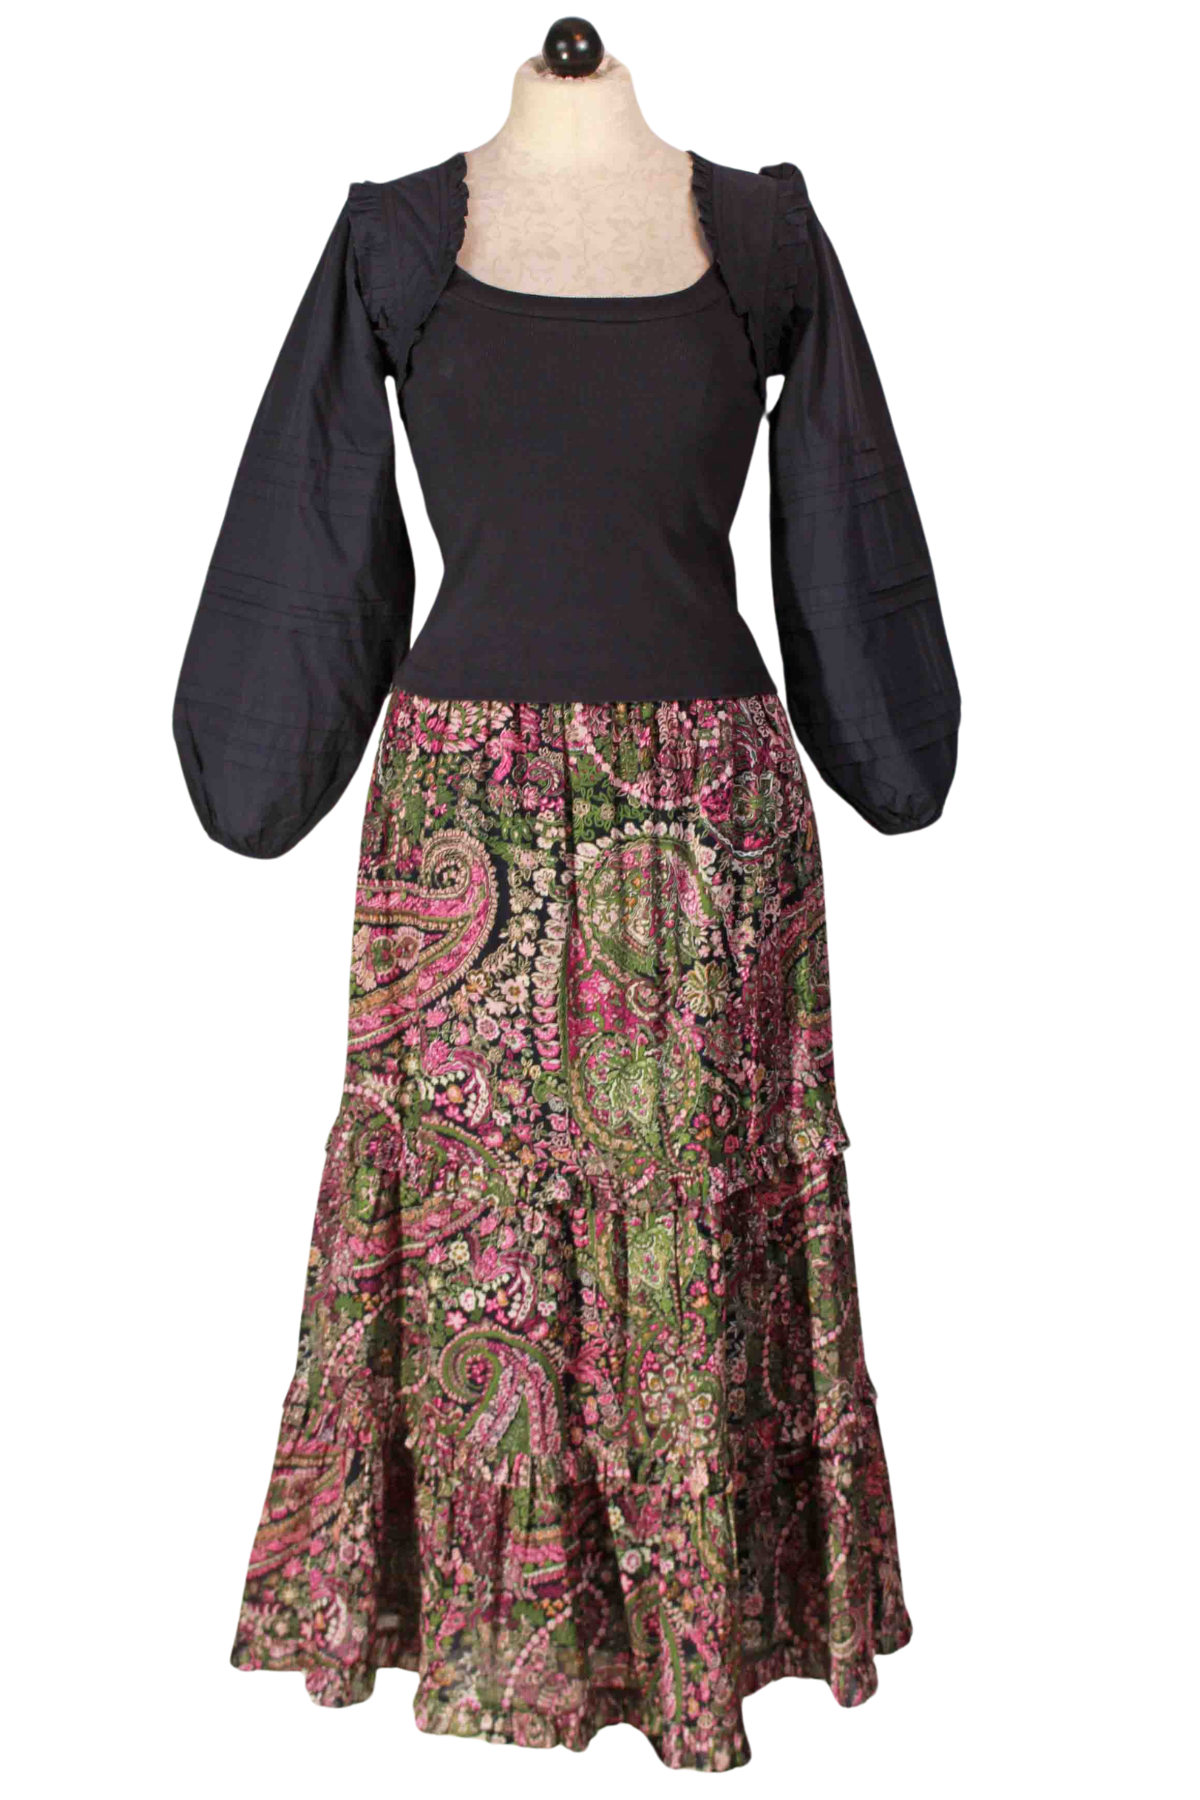 Caymen Paisley Purple Darcy Ankle Skirt by Cleobella paired with the Navy Reba Top by Cleobella